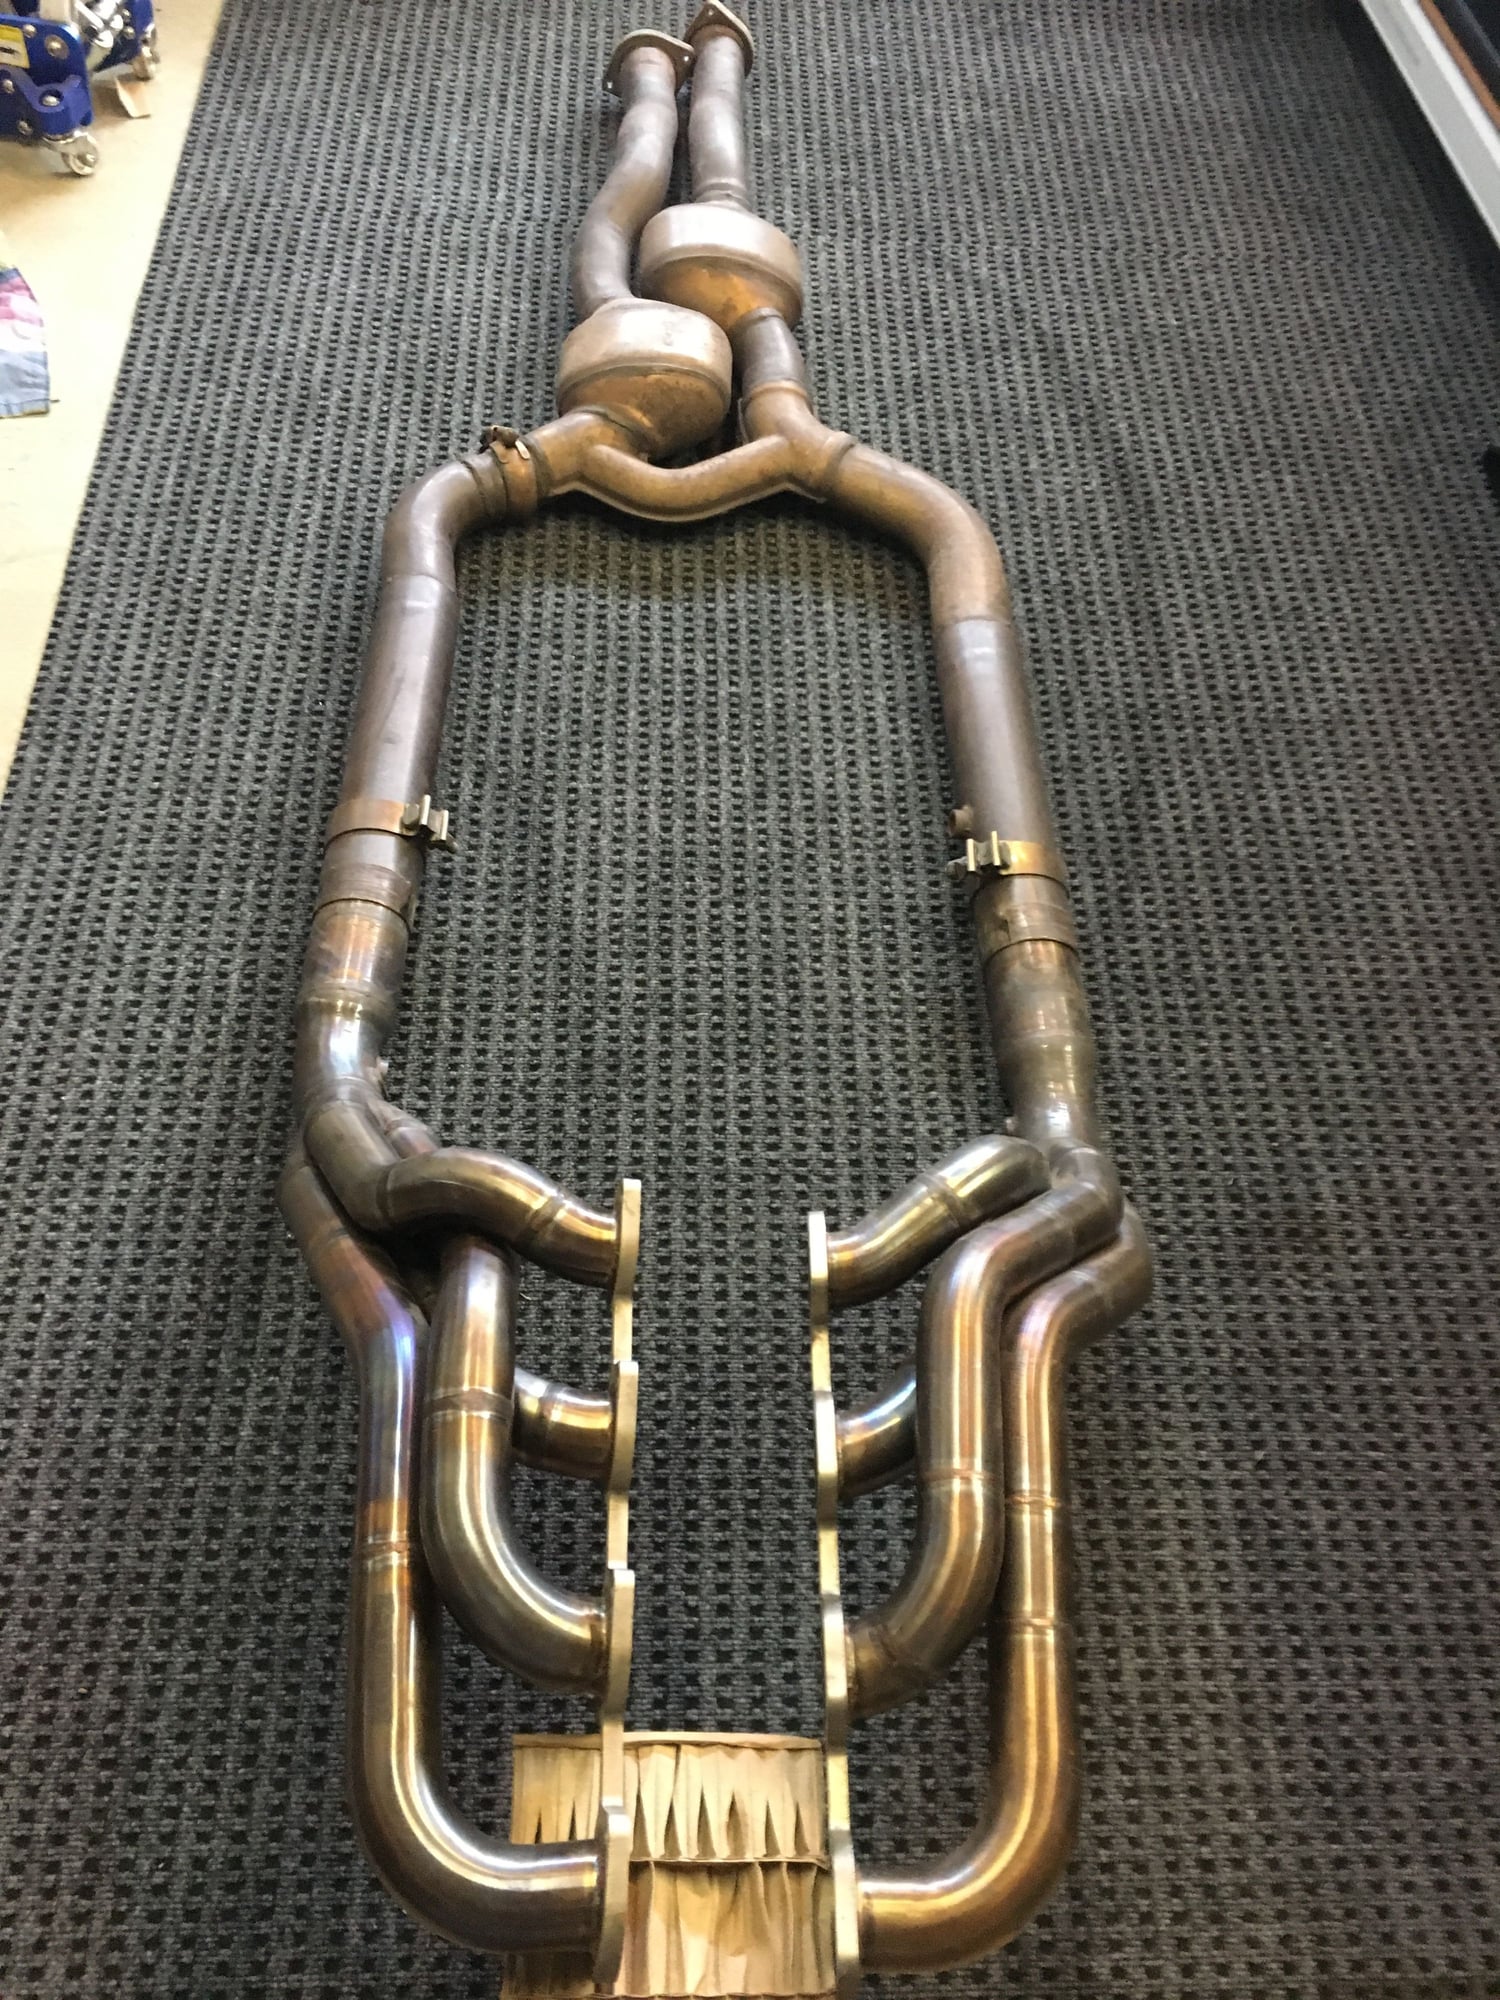 Engine - Exhaust - E55 dynocomp long tube headers & stock midsection setup - Used - 2003 to 2006 Mercedes-Benz E55 AMG - San Diego, CA 92125, United States